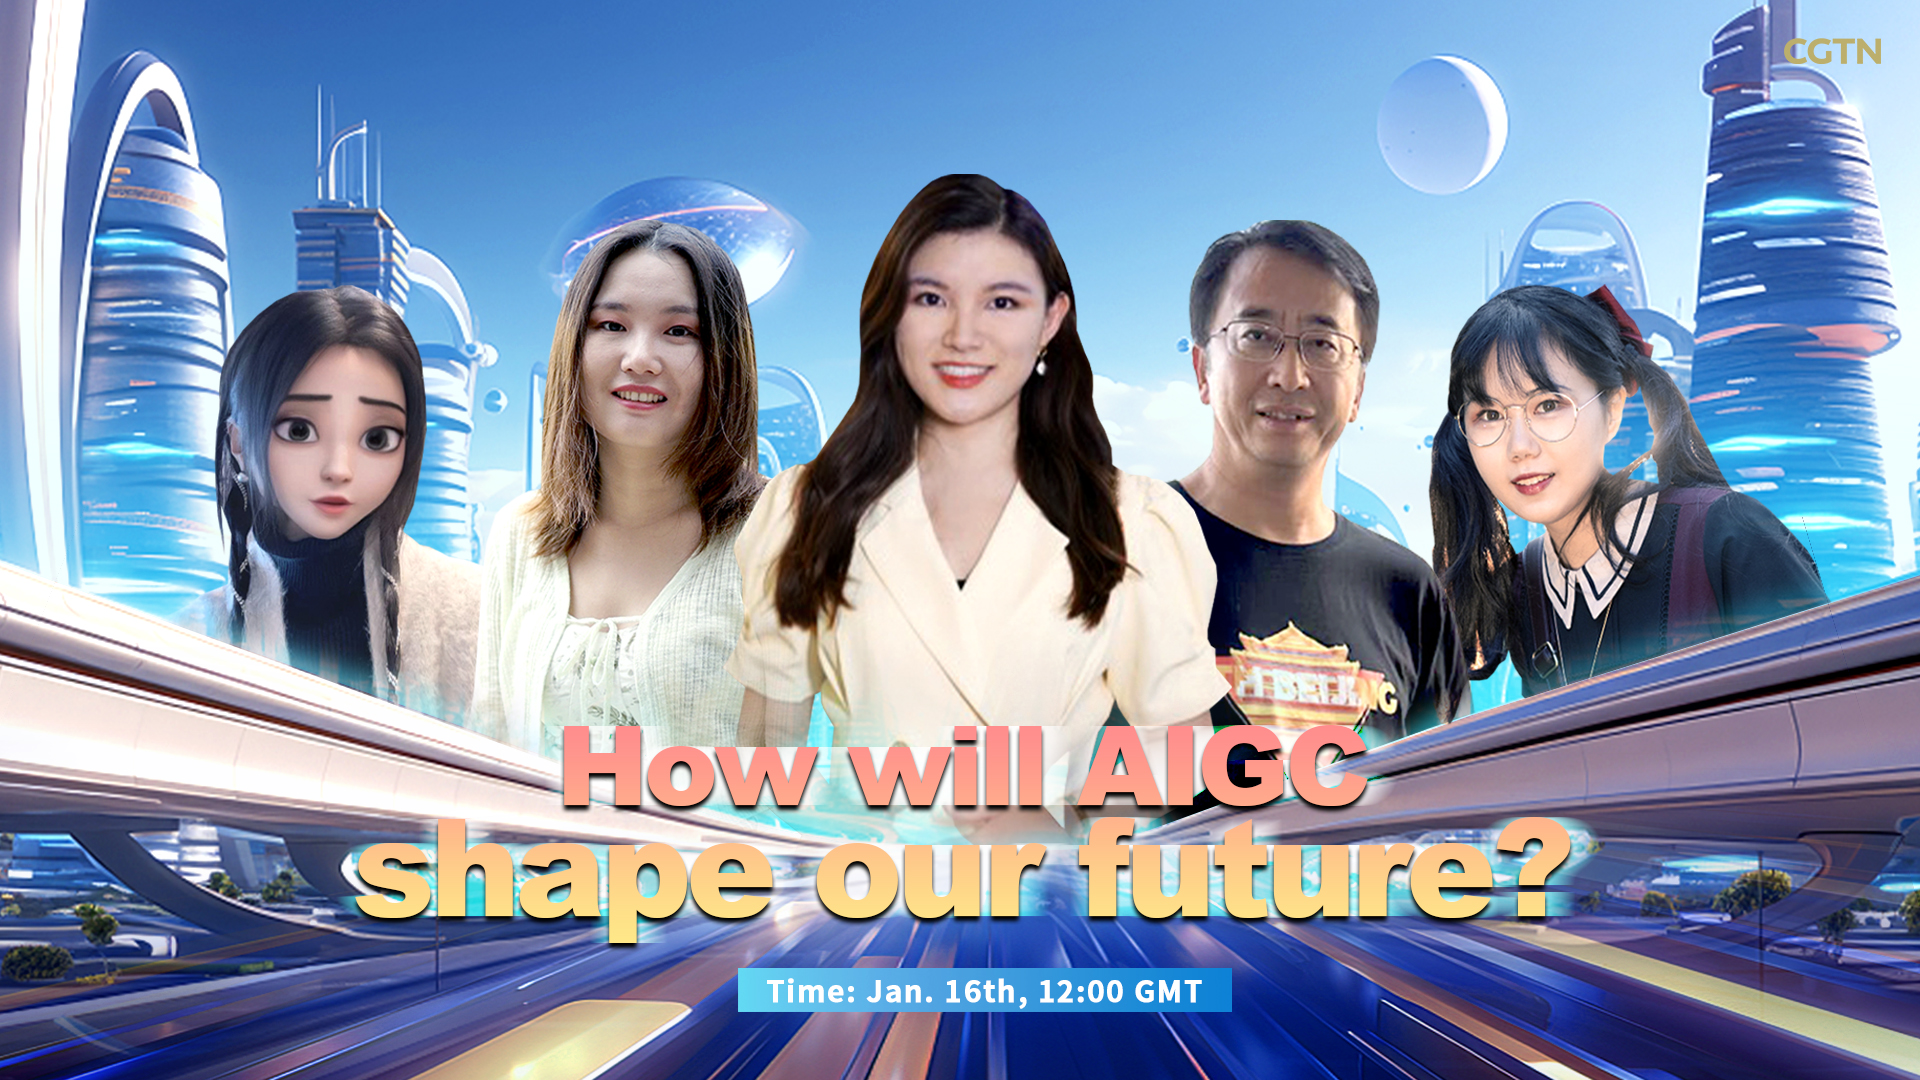 Watch: How will AIGC shape our future?